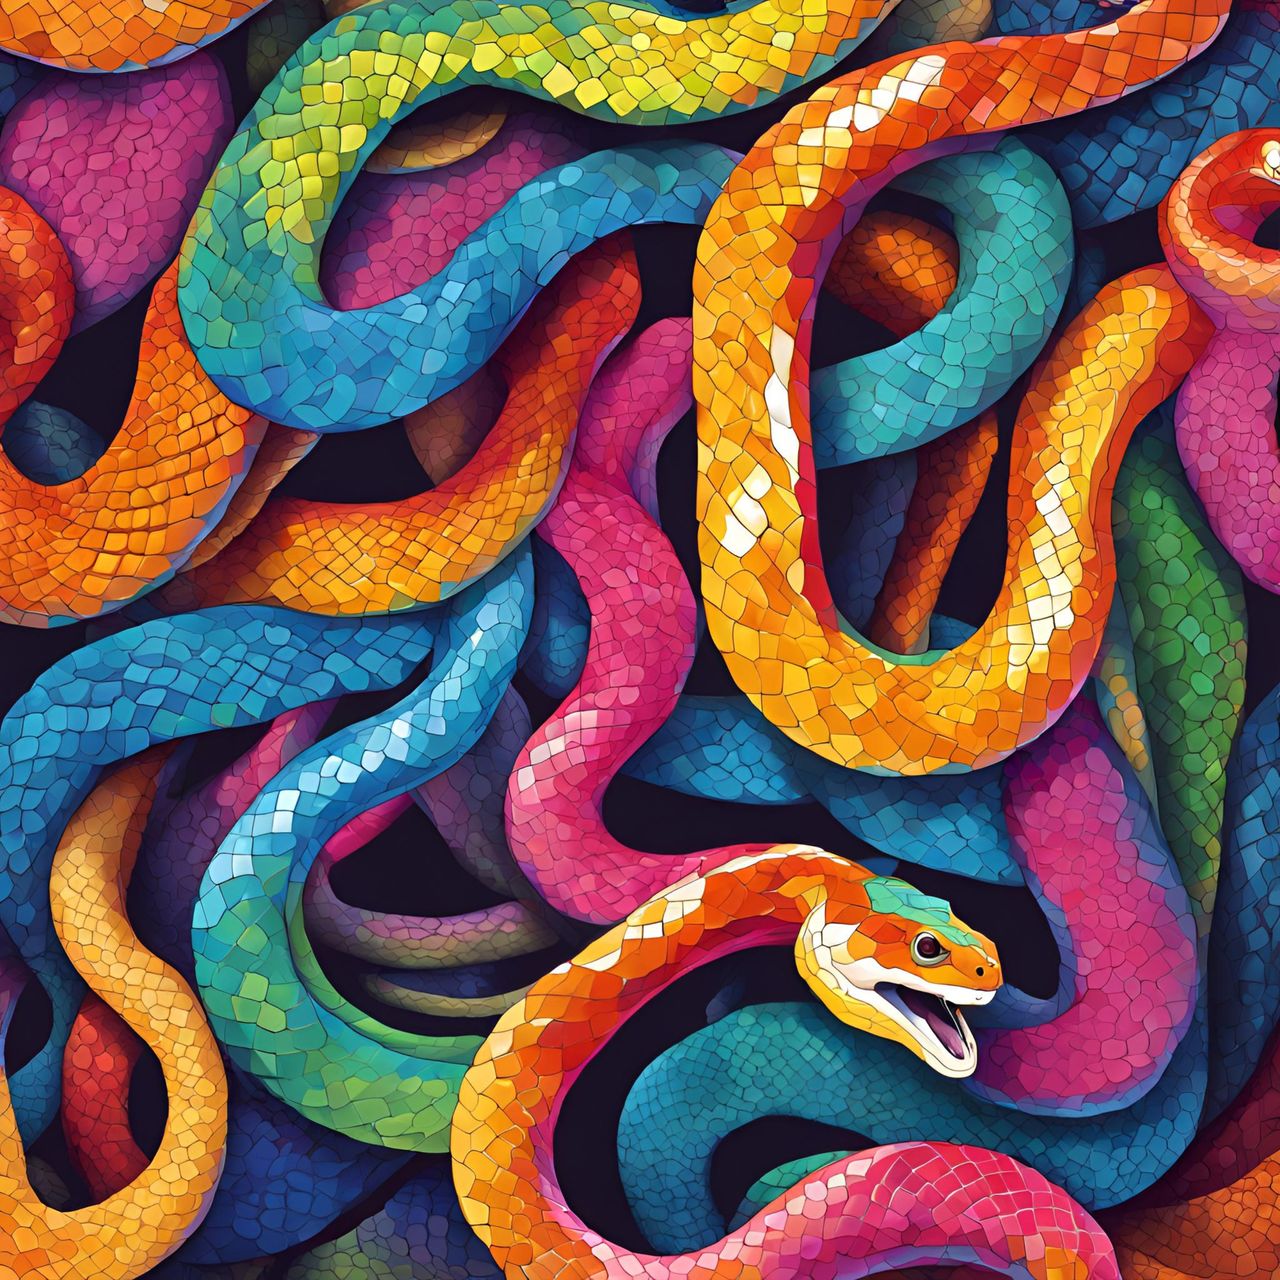 serpent, multi colored, snake, full frame, no people, reptile, backgrounds, close-up, animal, pattern, animal themes